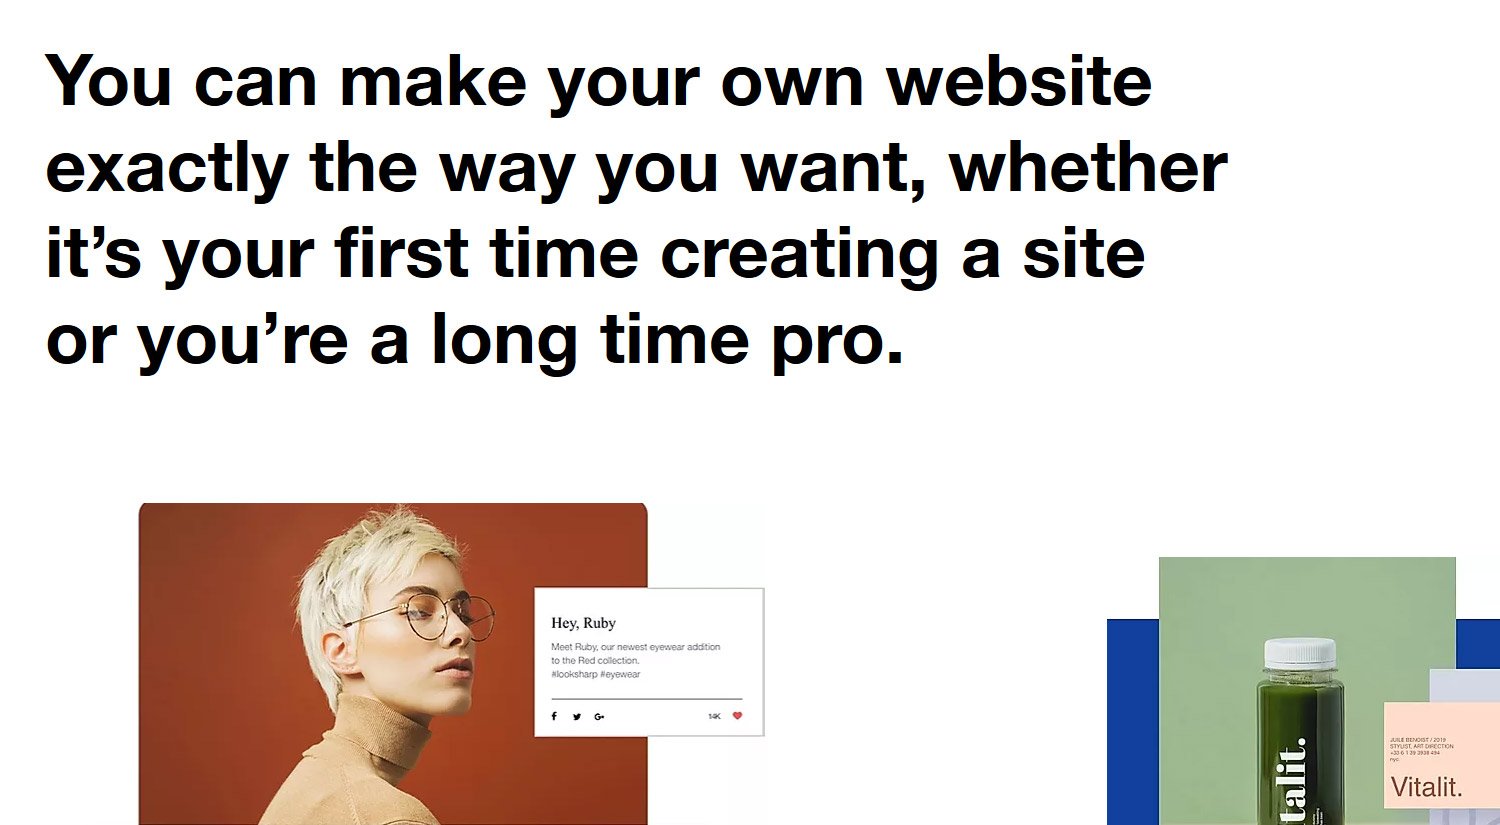 Create your own website with Wix